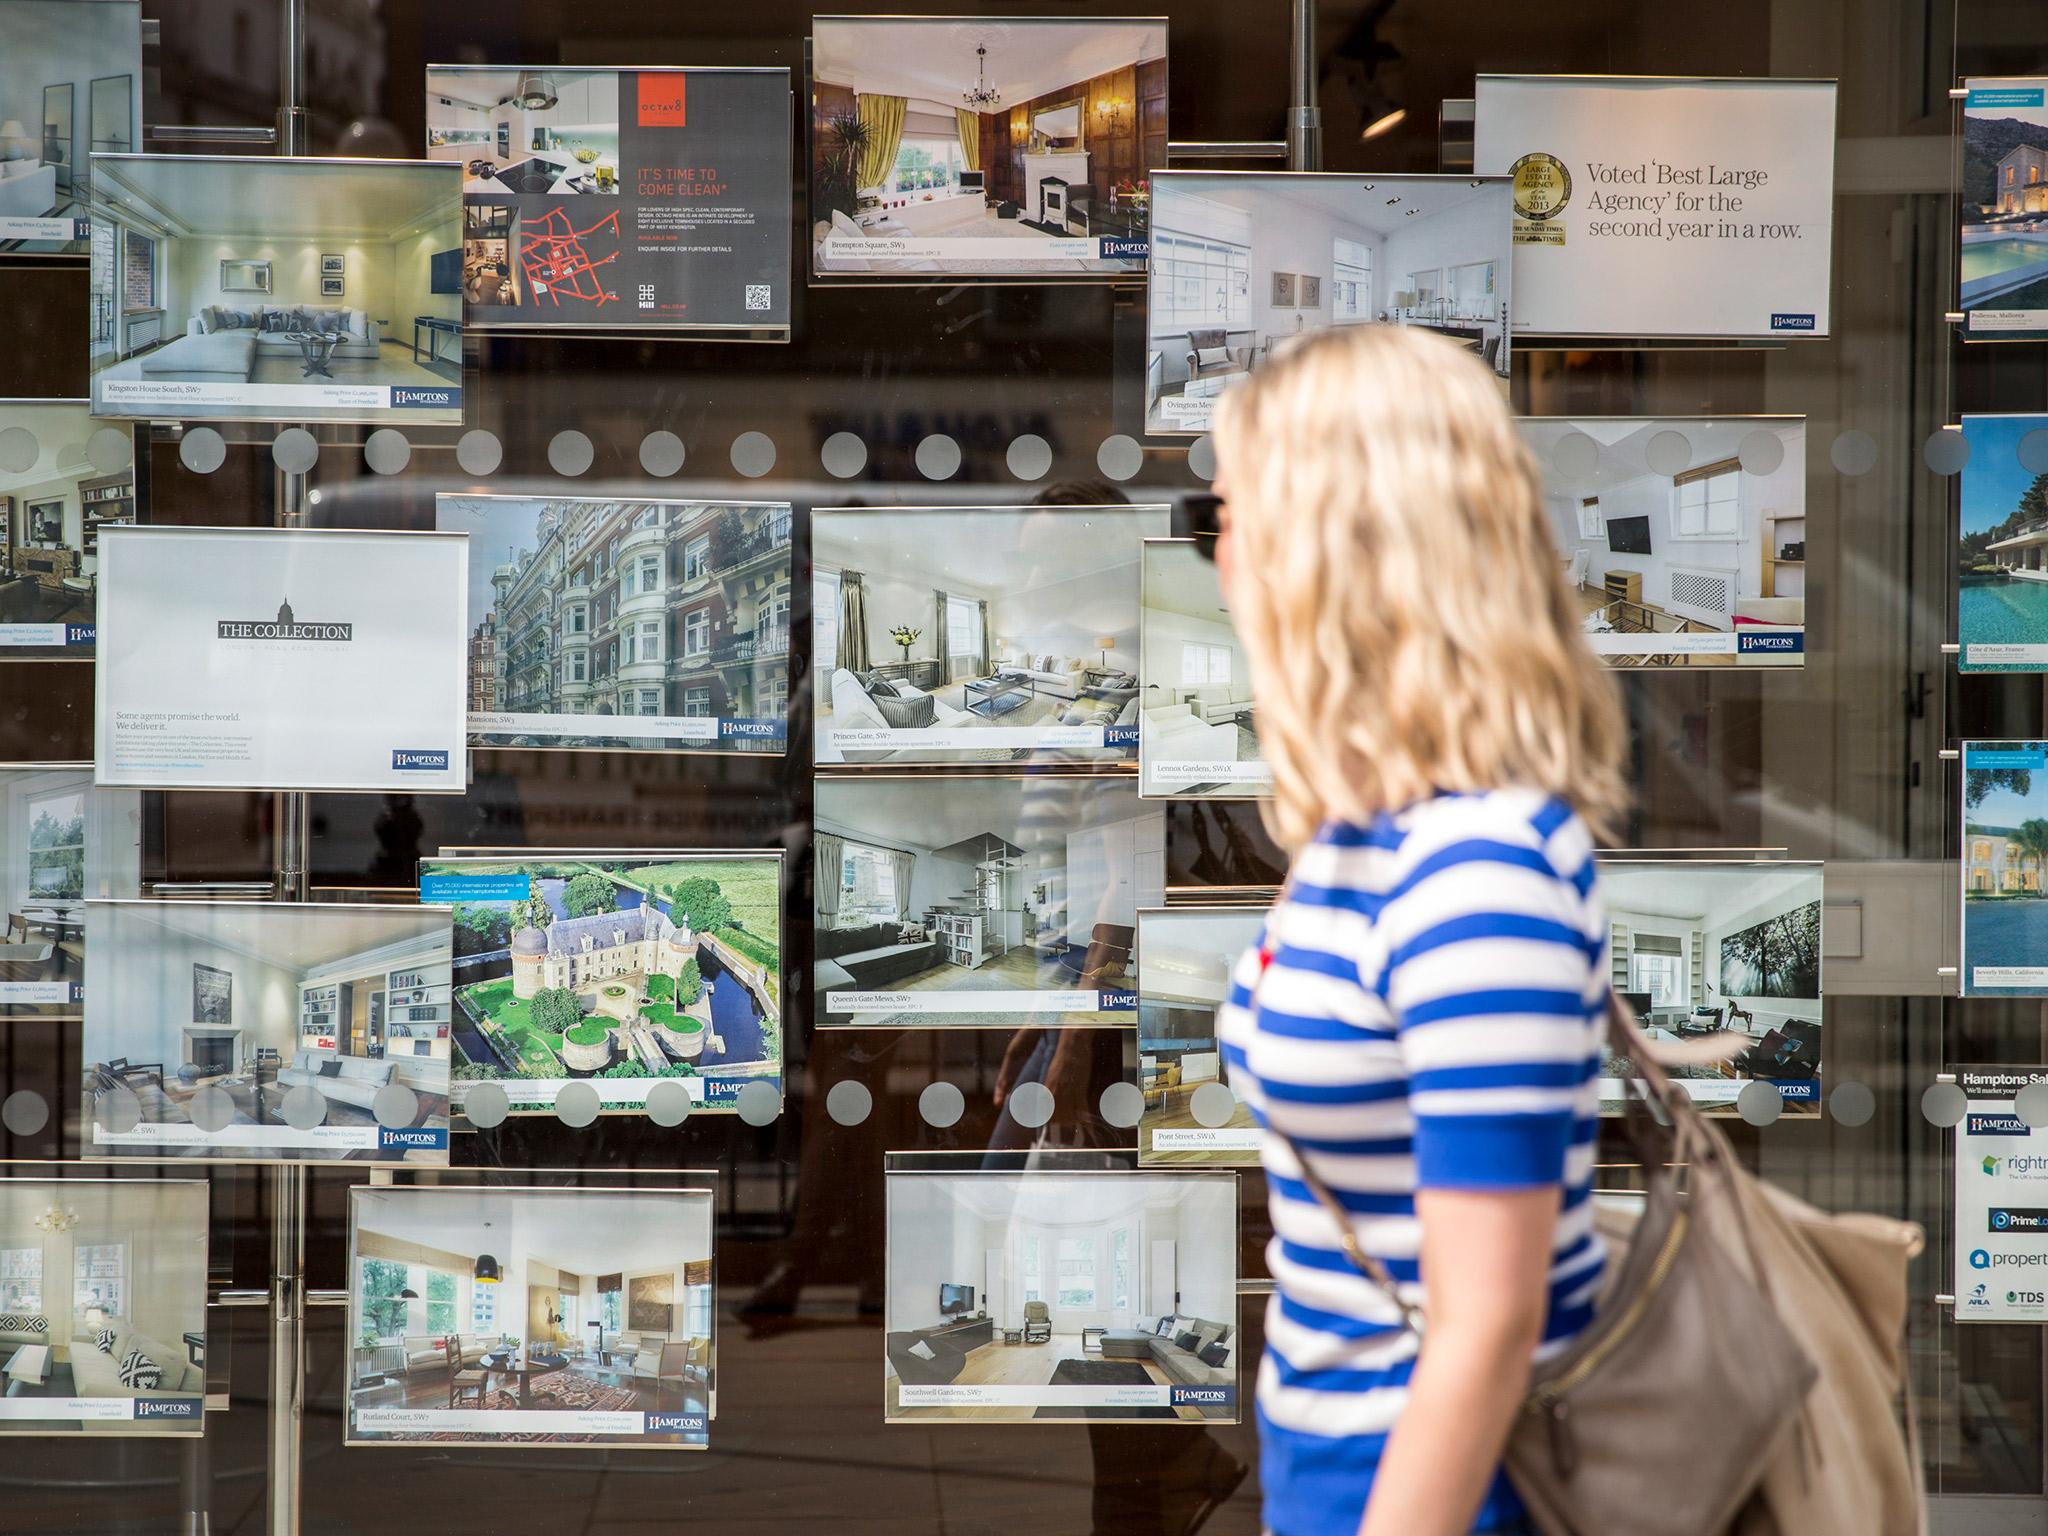 Sale prices in London fell for a third consecutive month in June